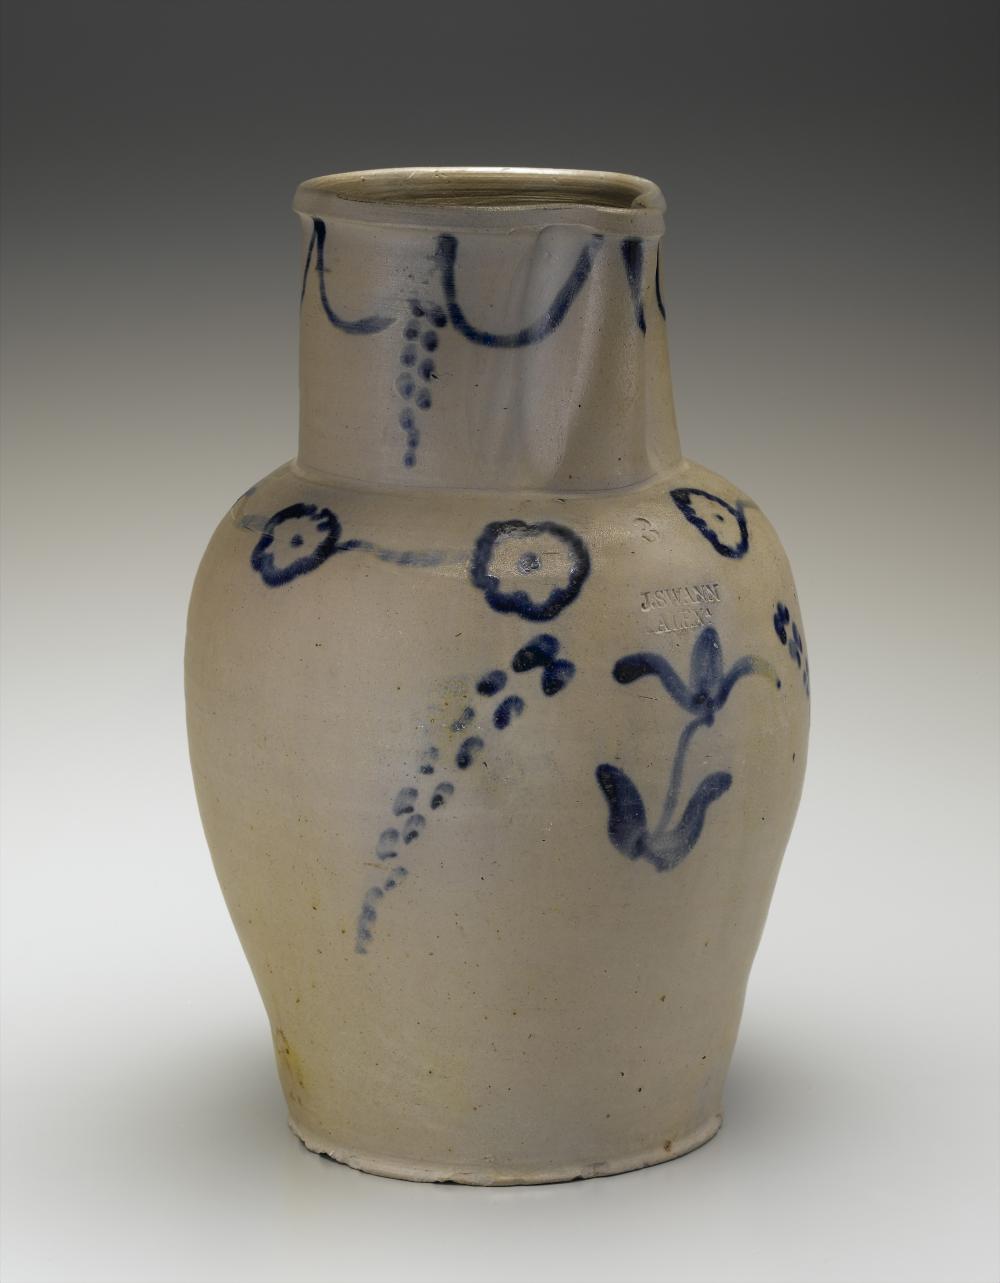 Alexandria stoneware pitcher by John Swann, with cobalt decoration (Photo by Gavin Ashworth for Ceramics in America).